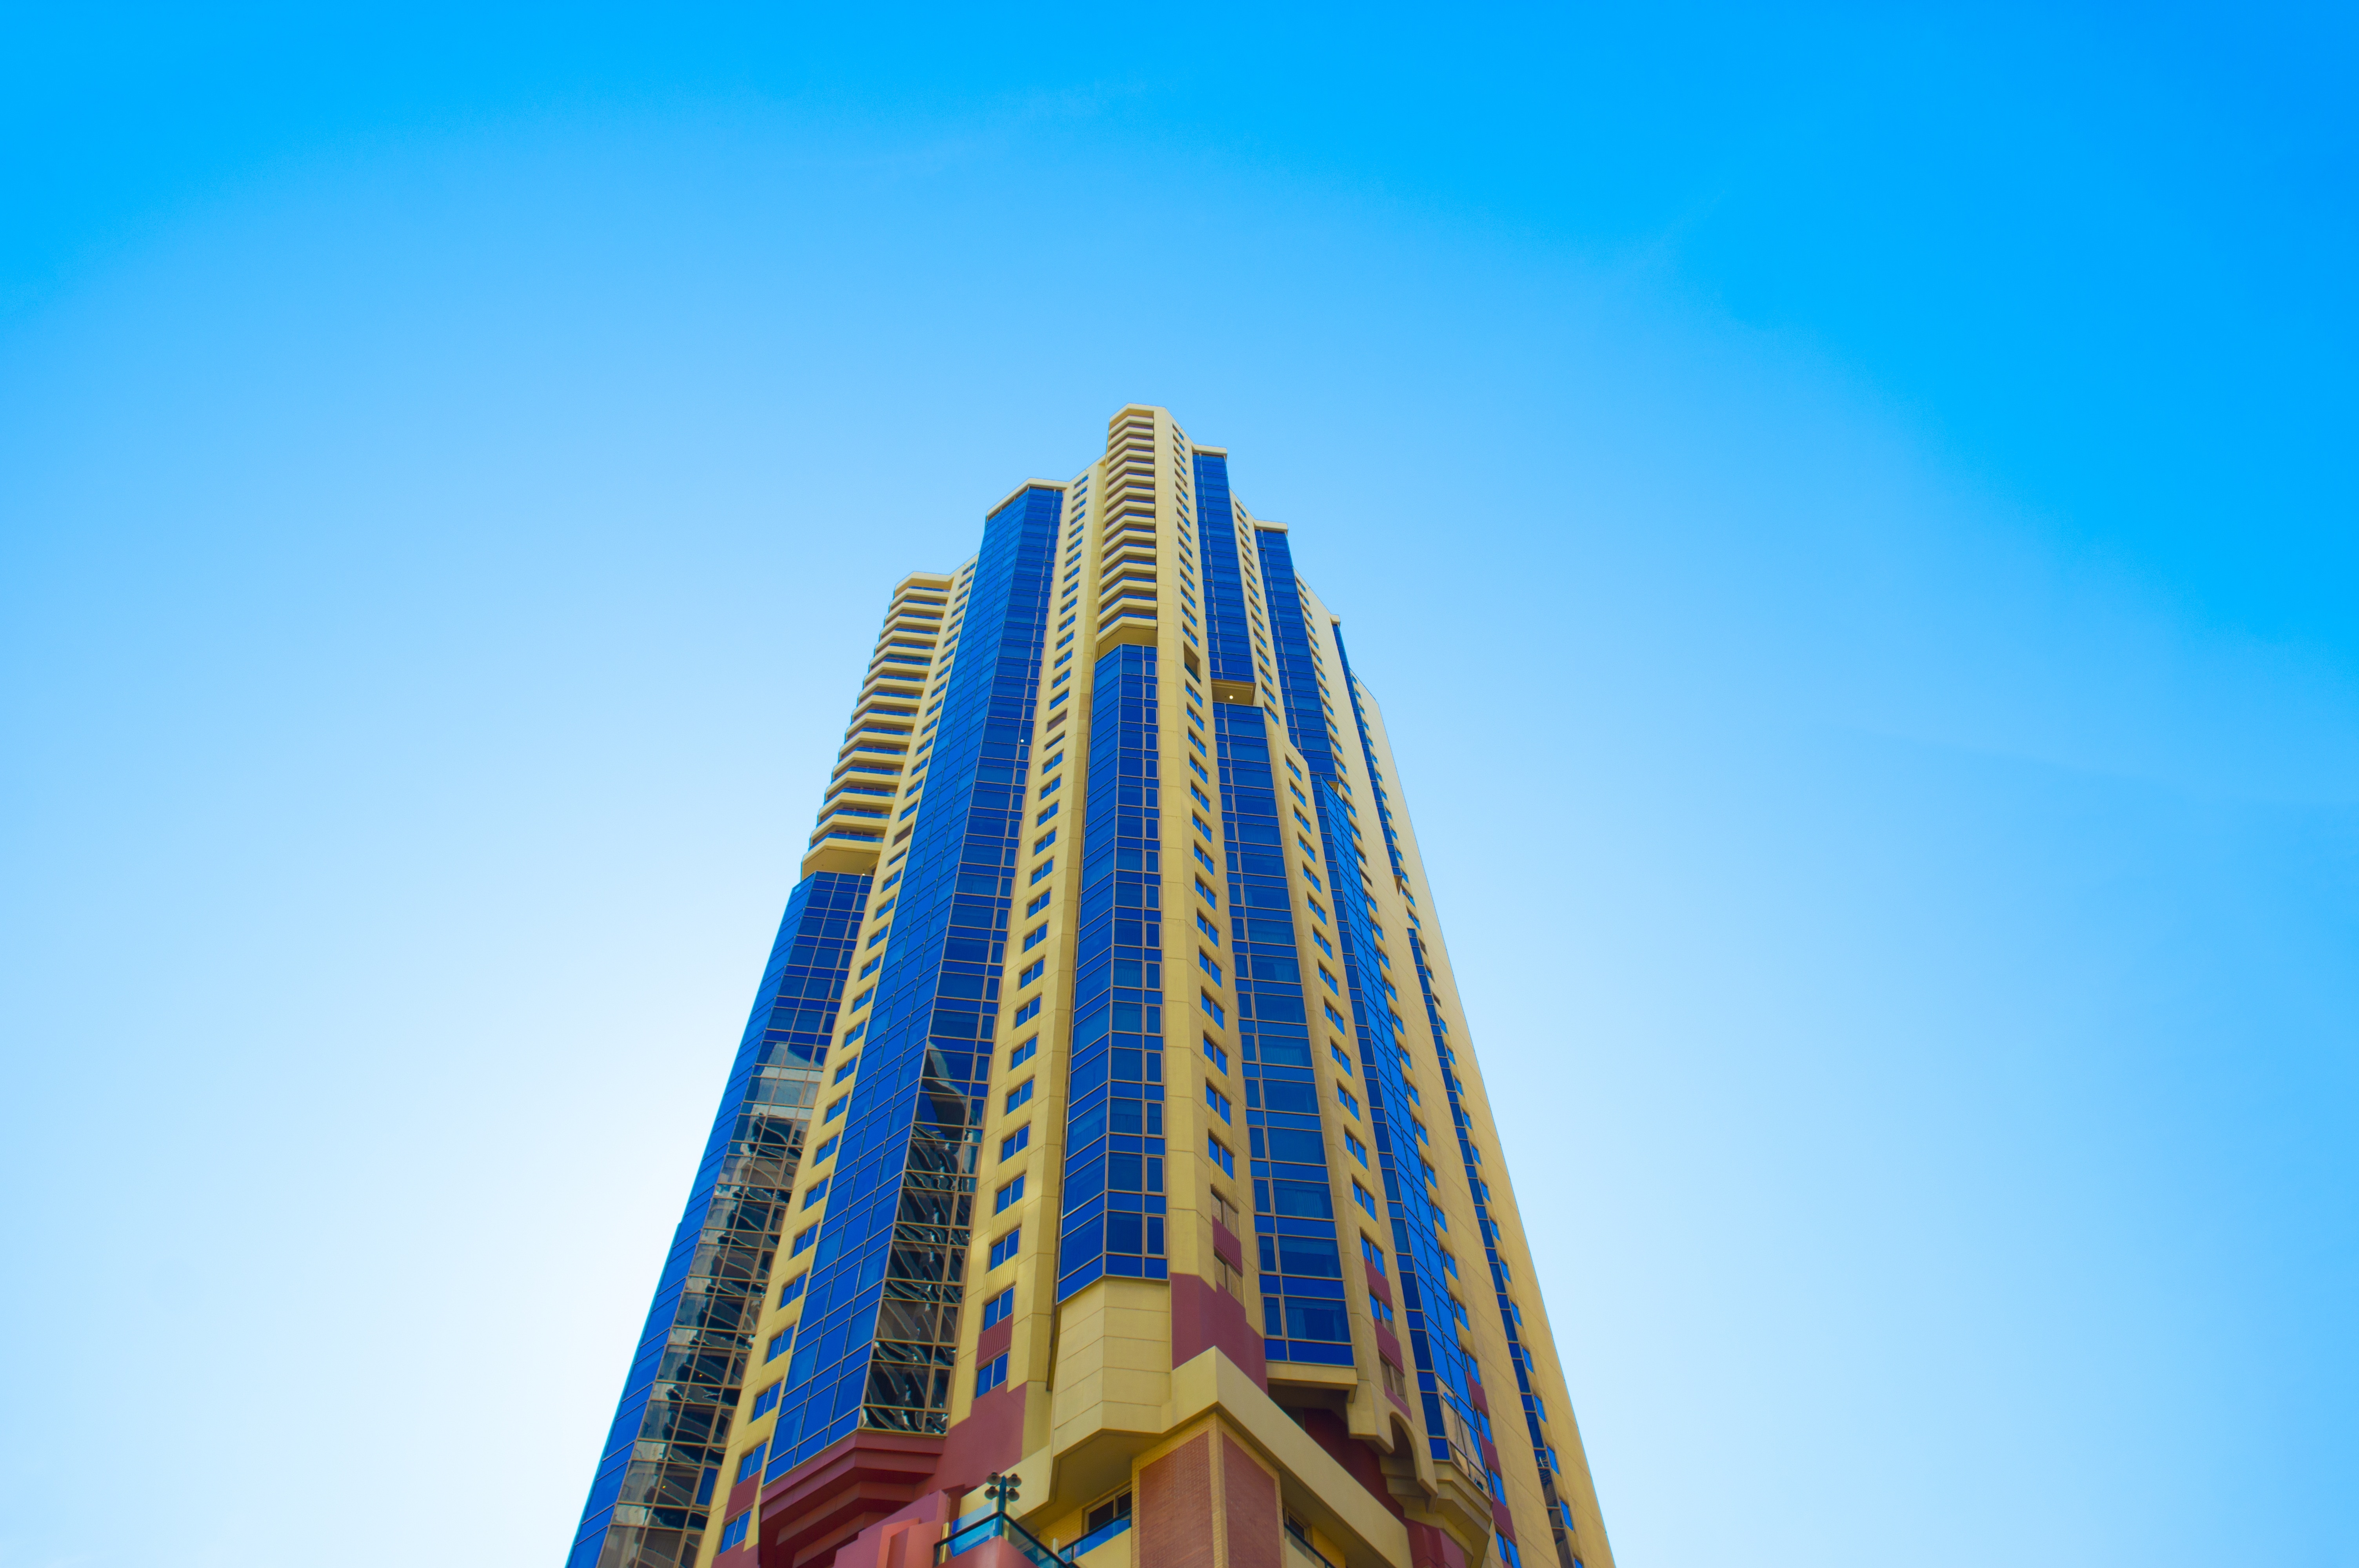 low angle view of blue and yellow commercial building